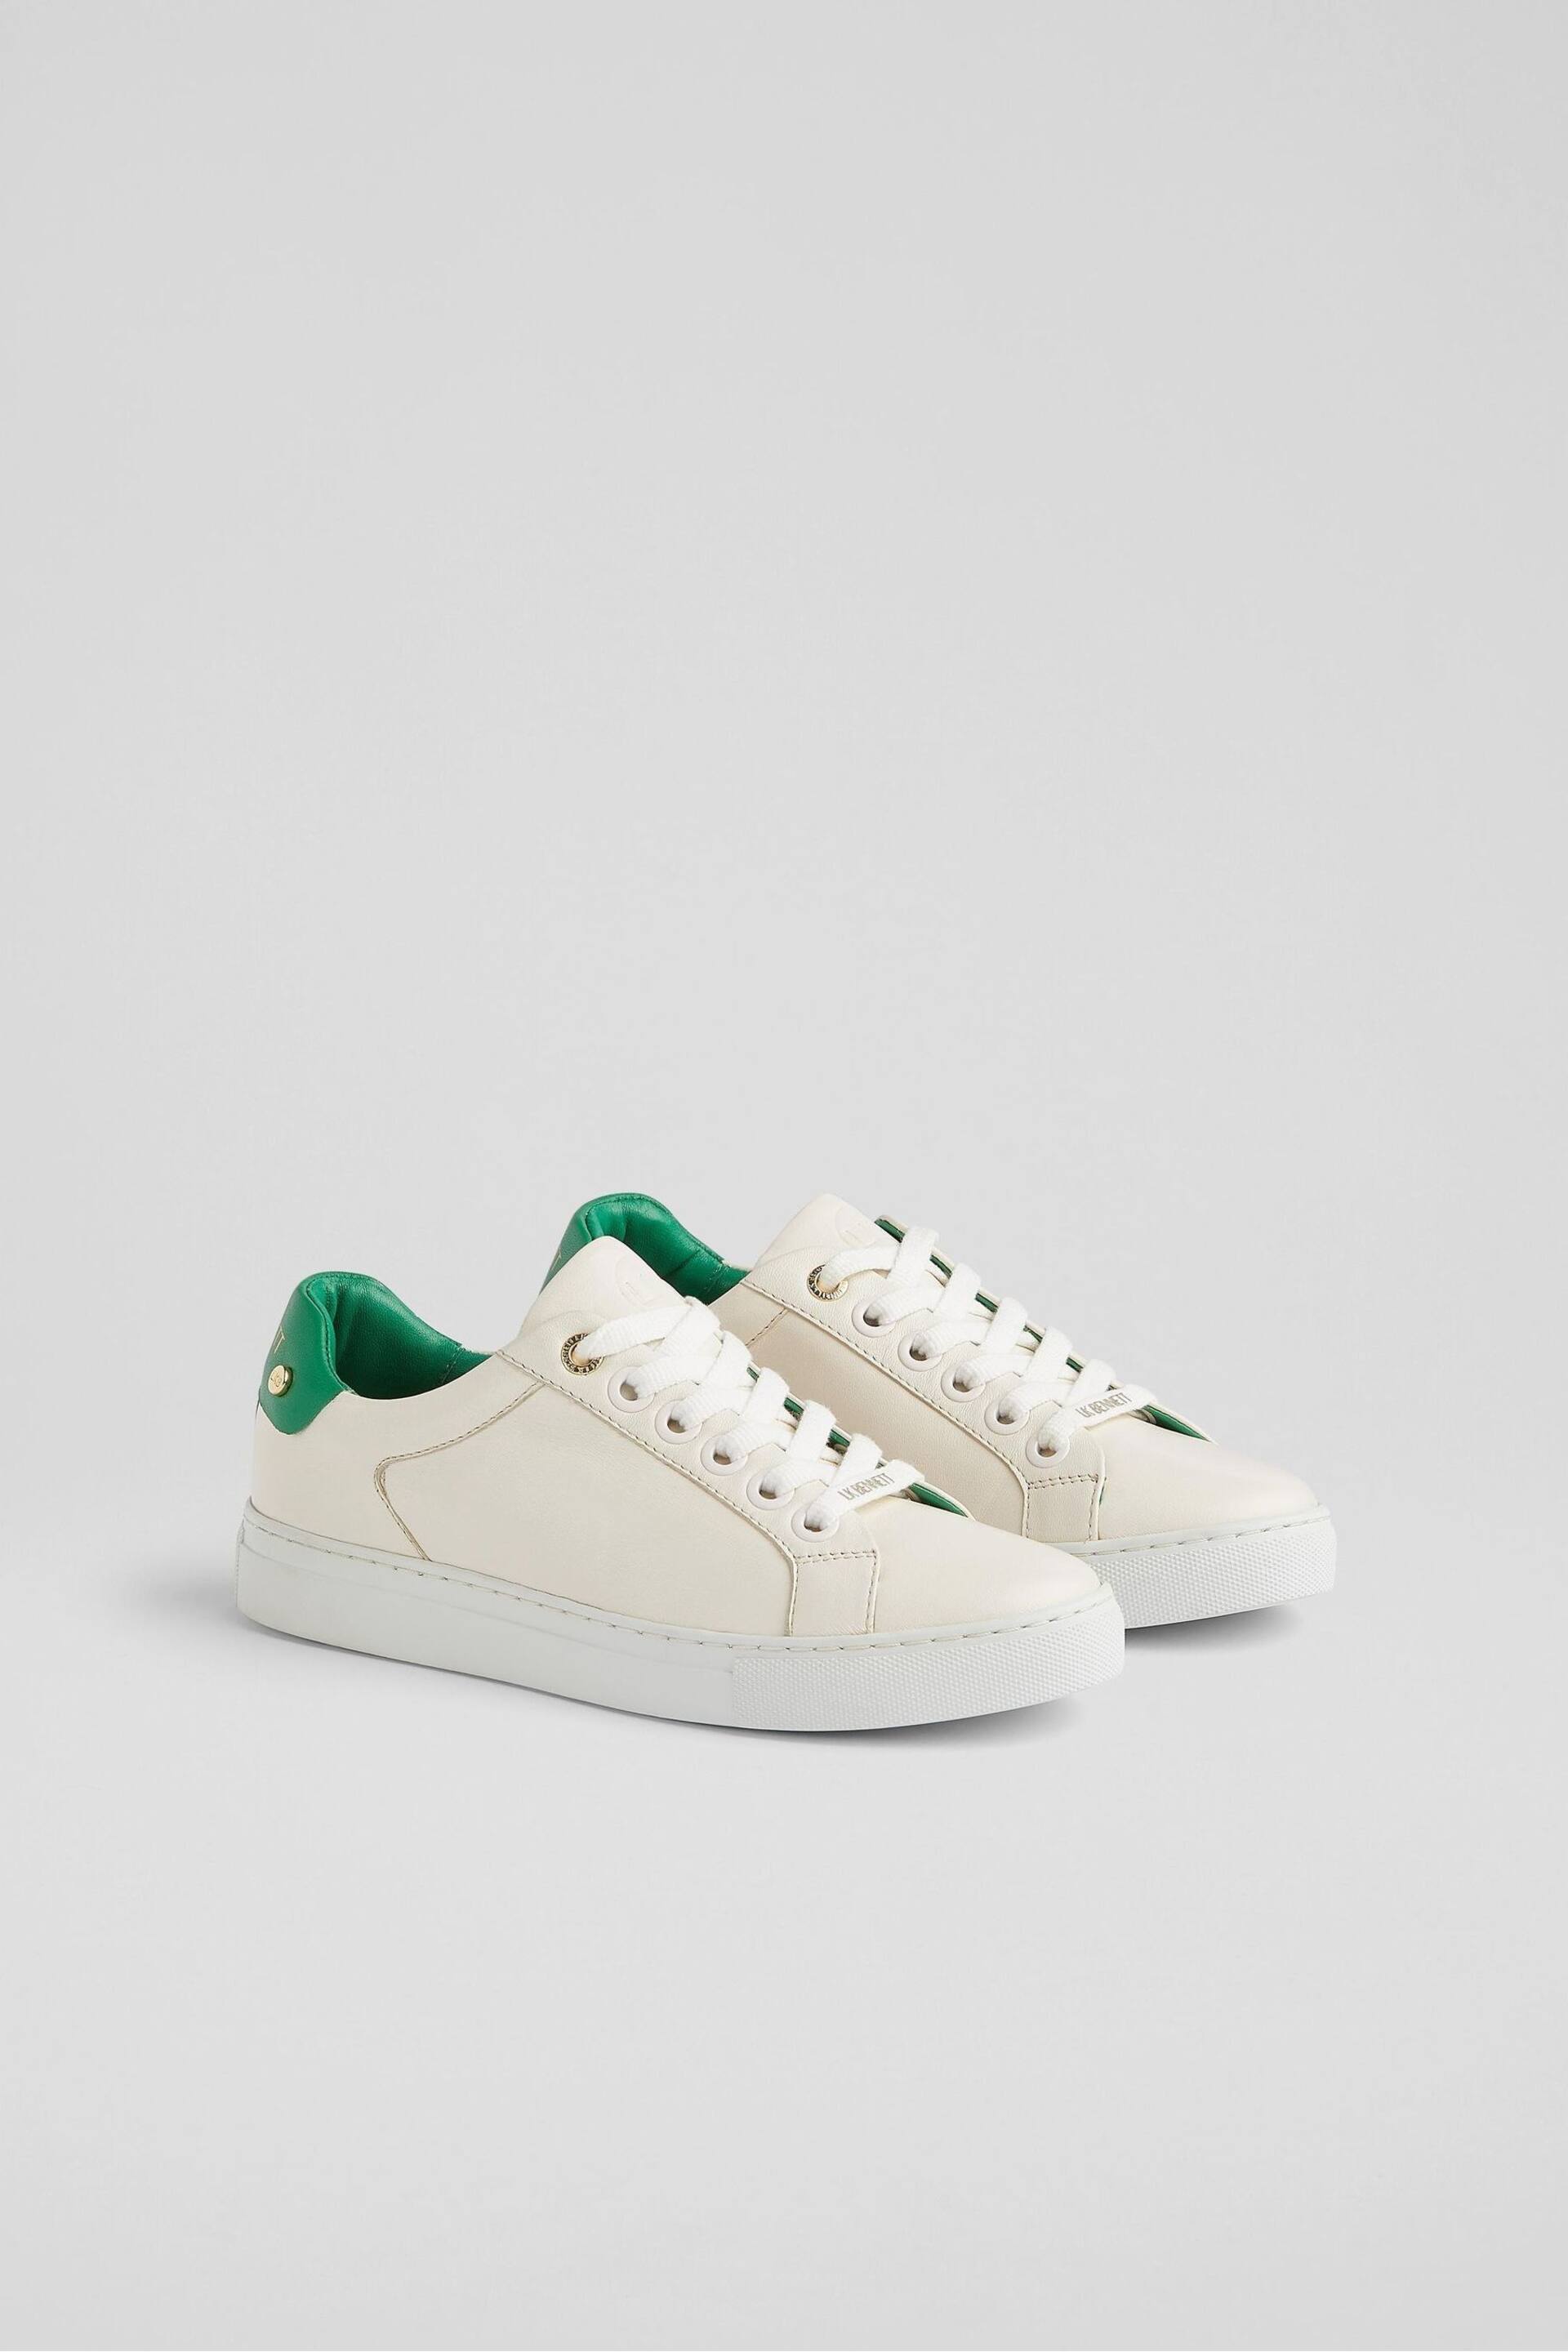 LK Bennett Signature Leather Trainers - Image 5 of 7